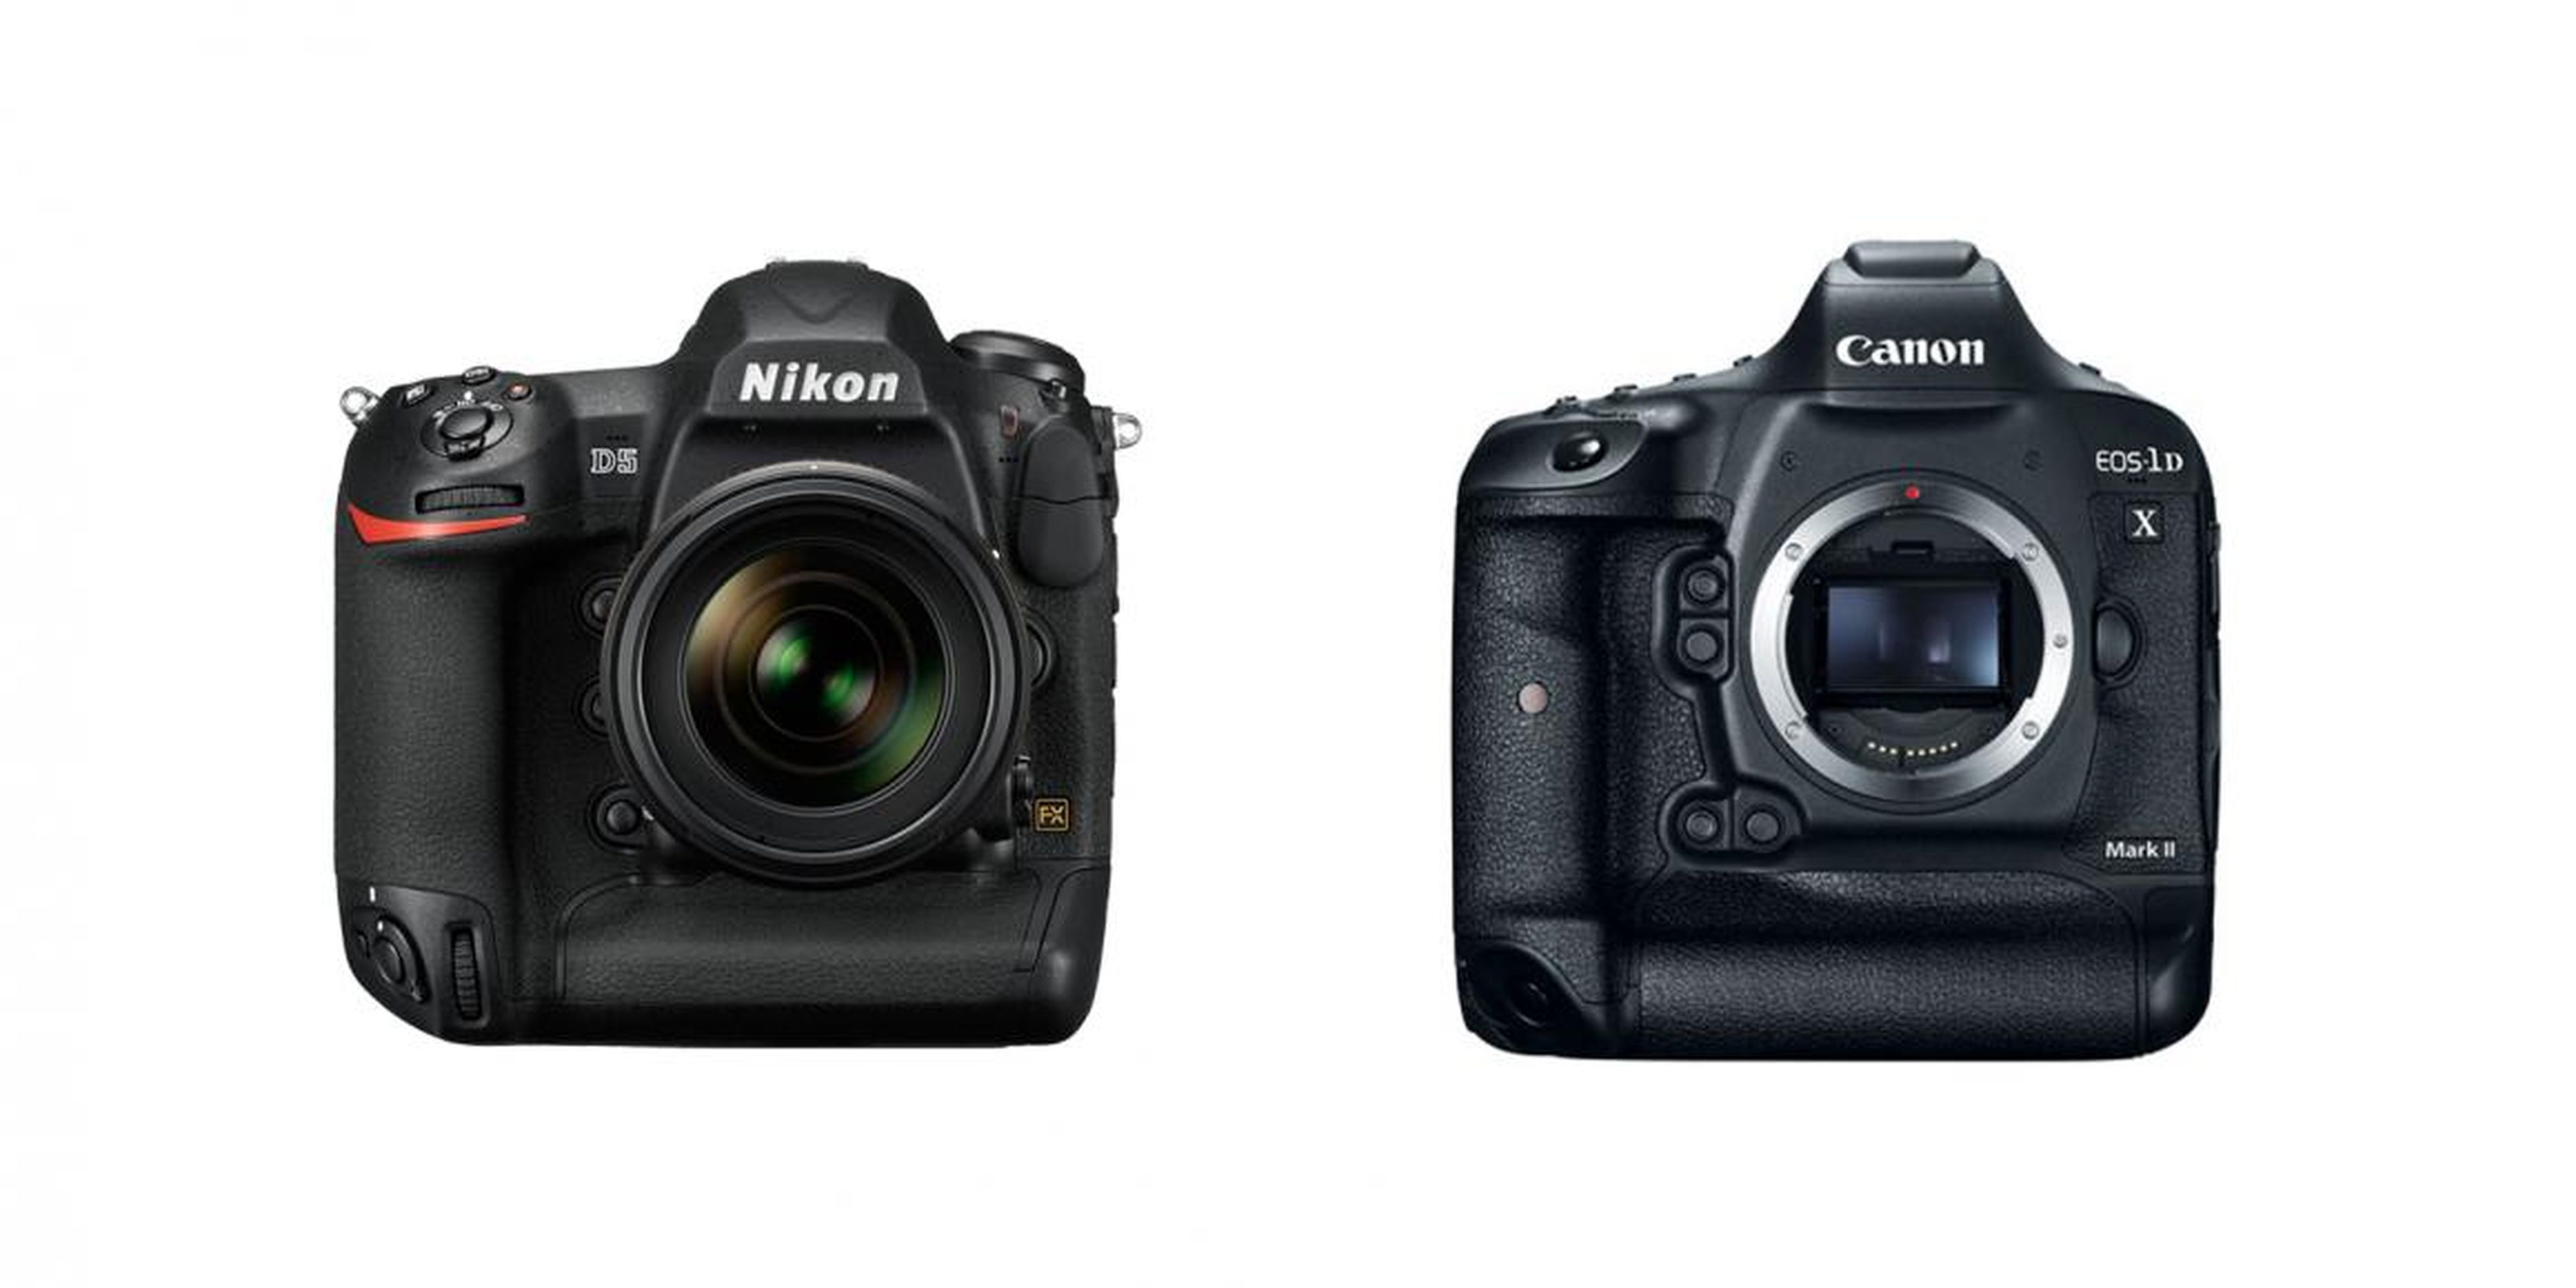 Here's how to choose between Canon and Nikon if you're ready to ditch your phone and get a real camera